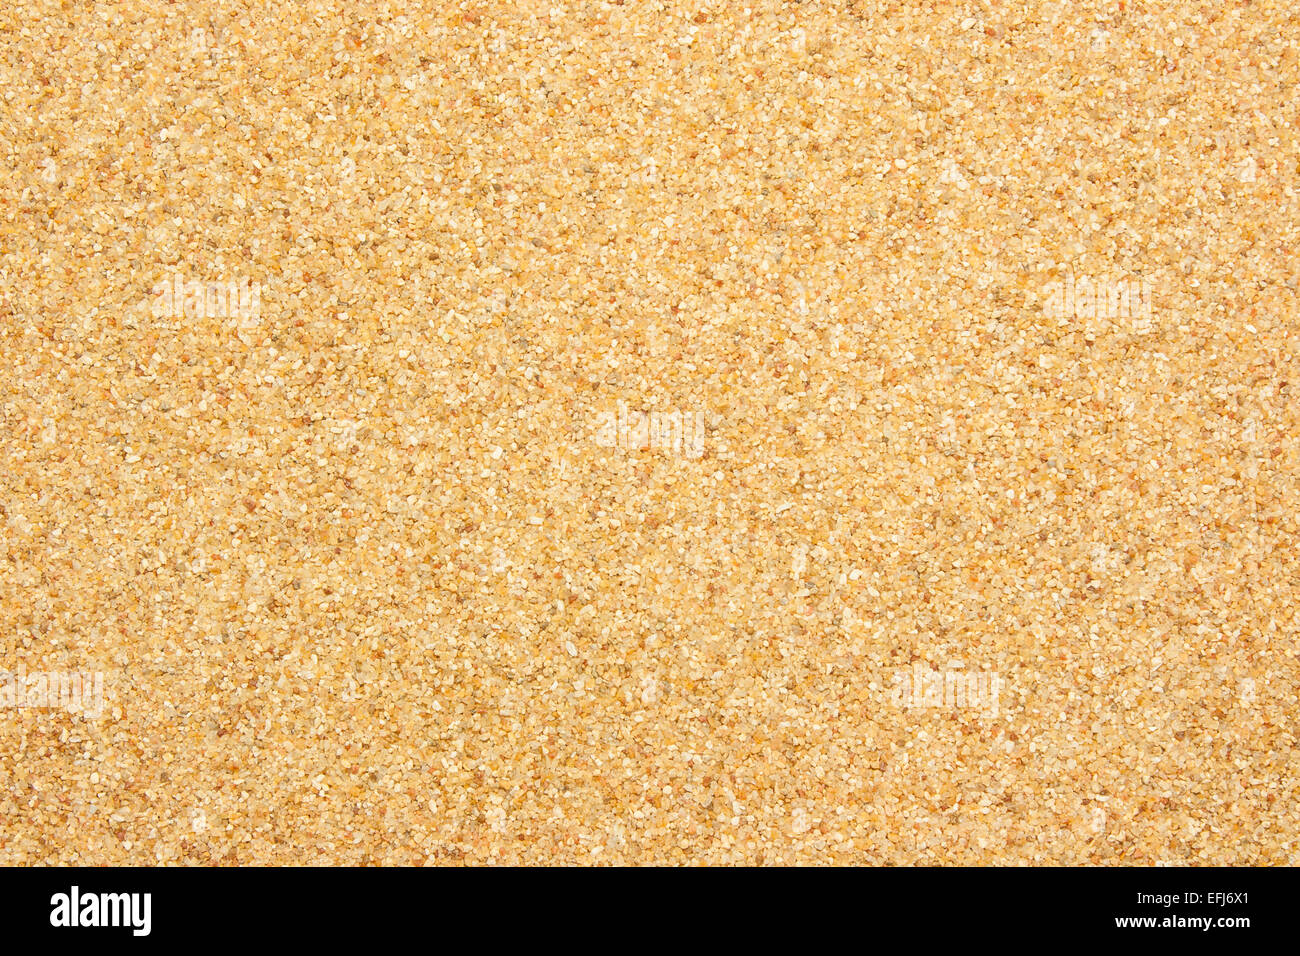 Closeup view from the top of coarse river sand which is light red in color. Stock Photo